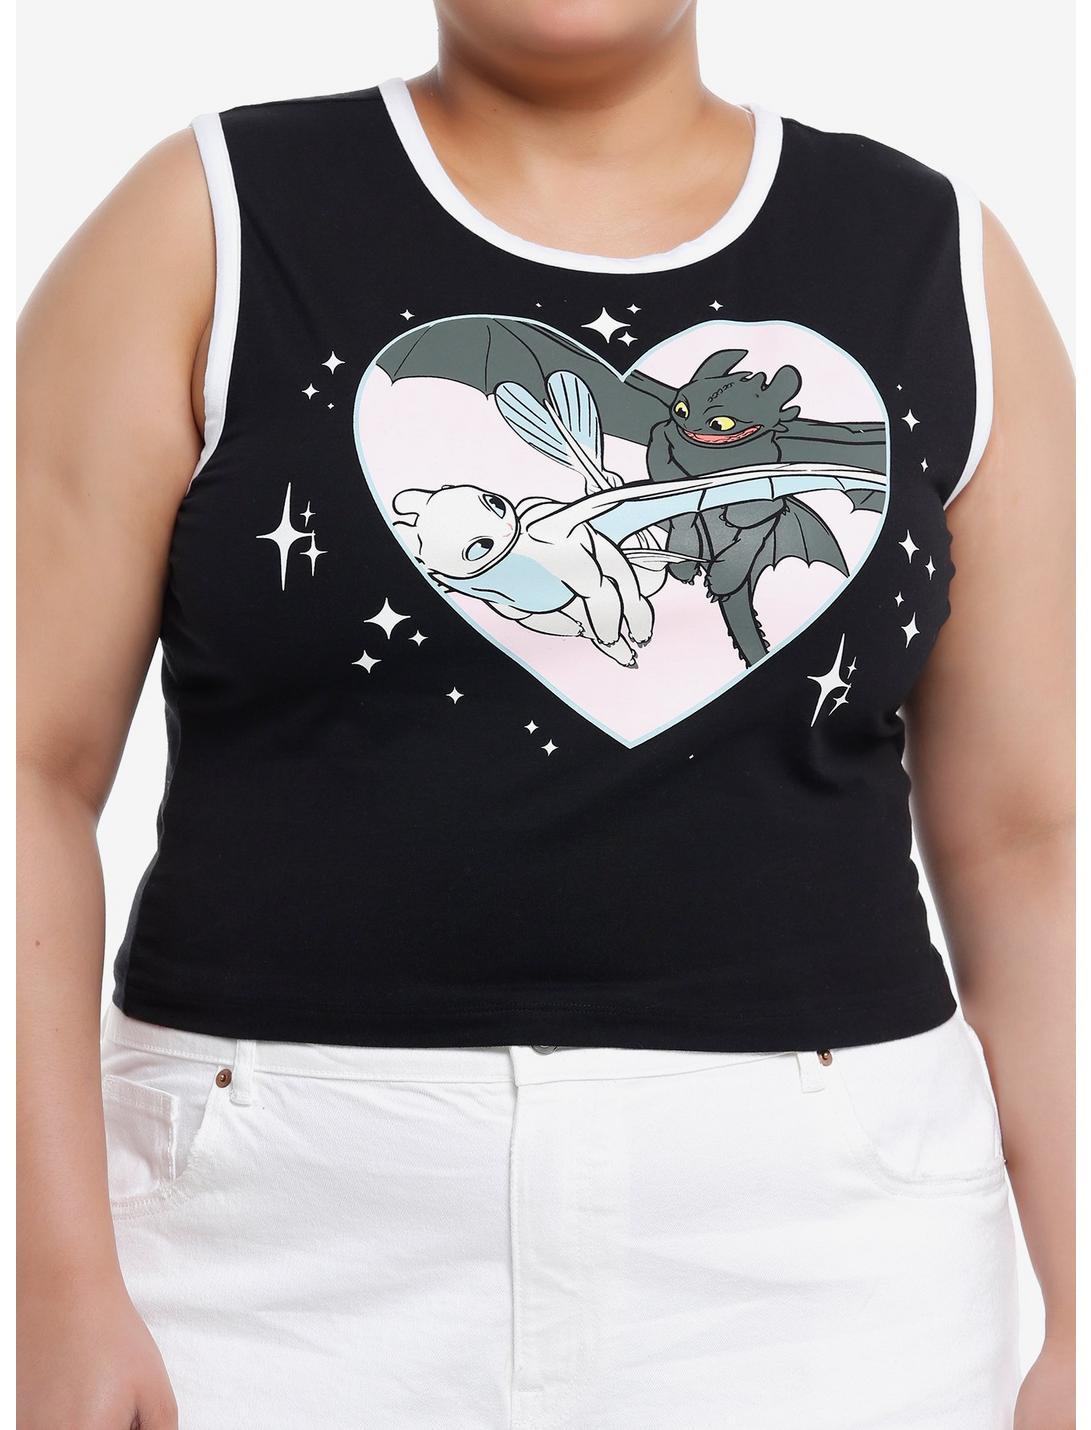 How To Train Your Dragon Toothless & Light Fury Girls Tank Top Plus Size, MULTI, hi-res